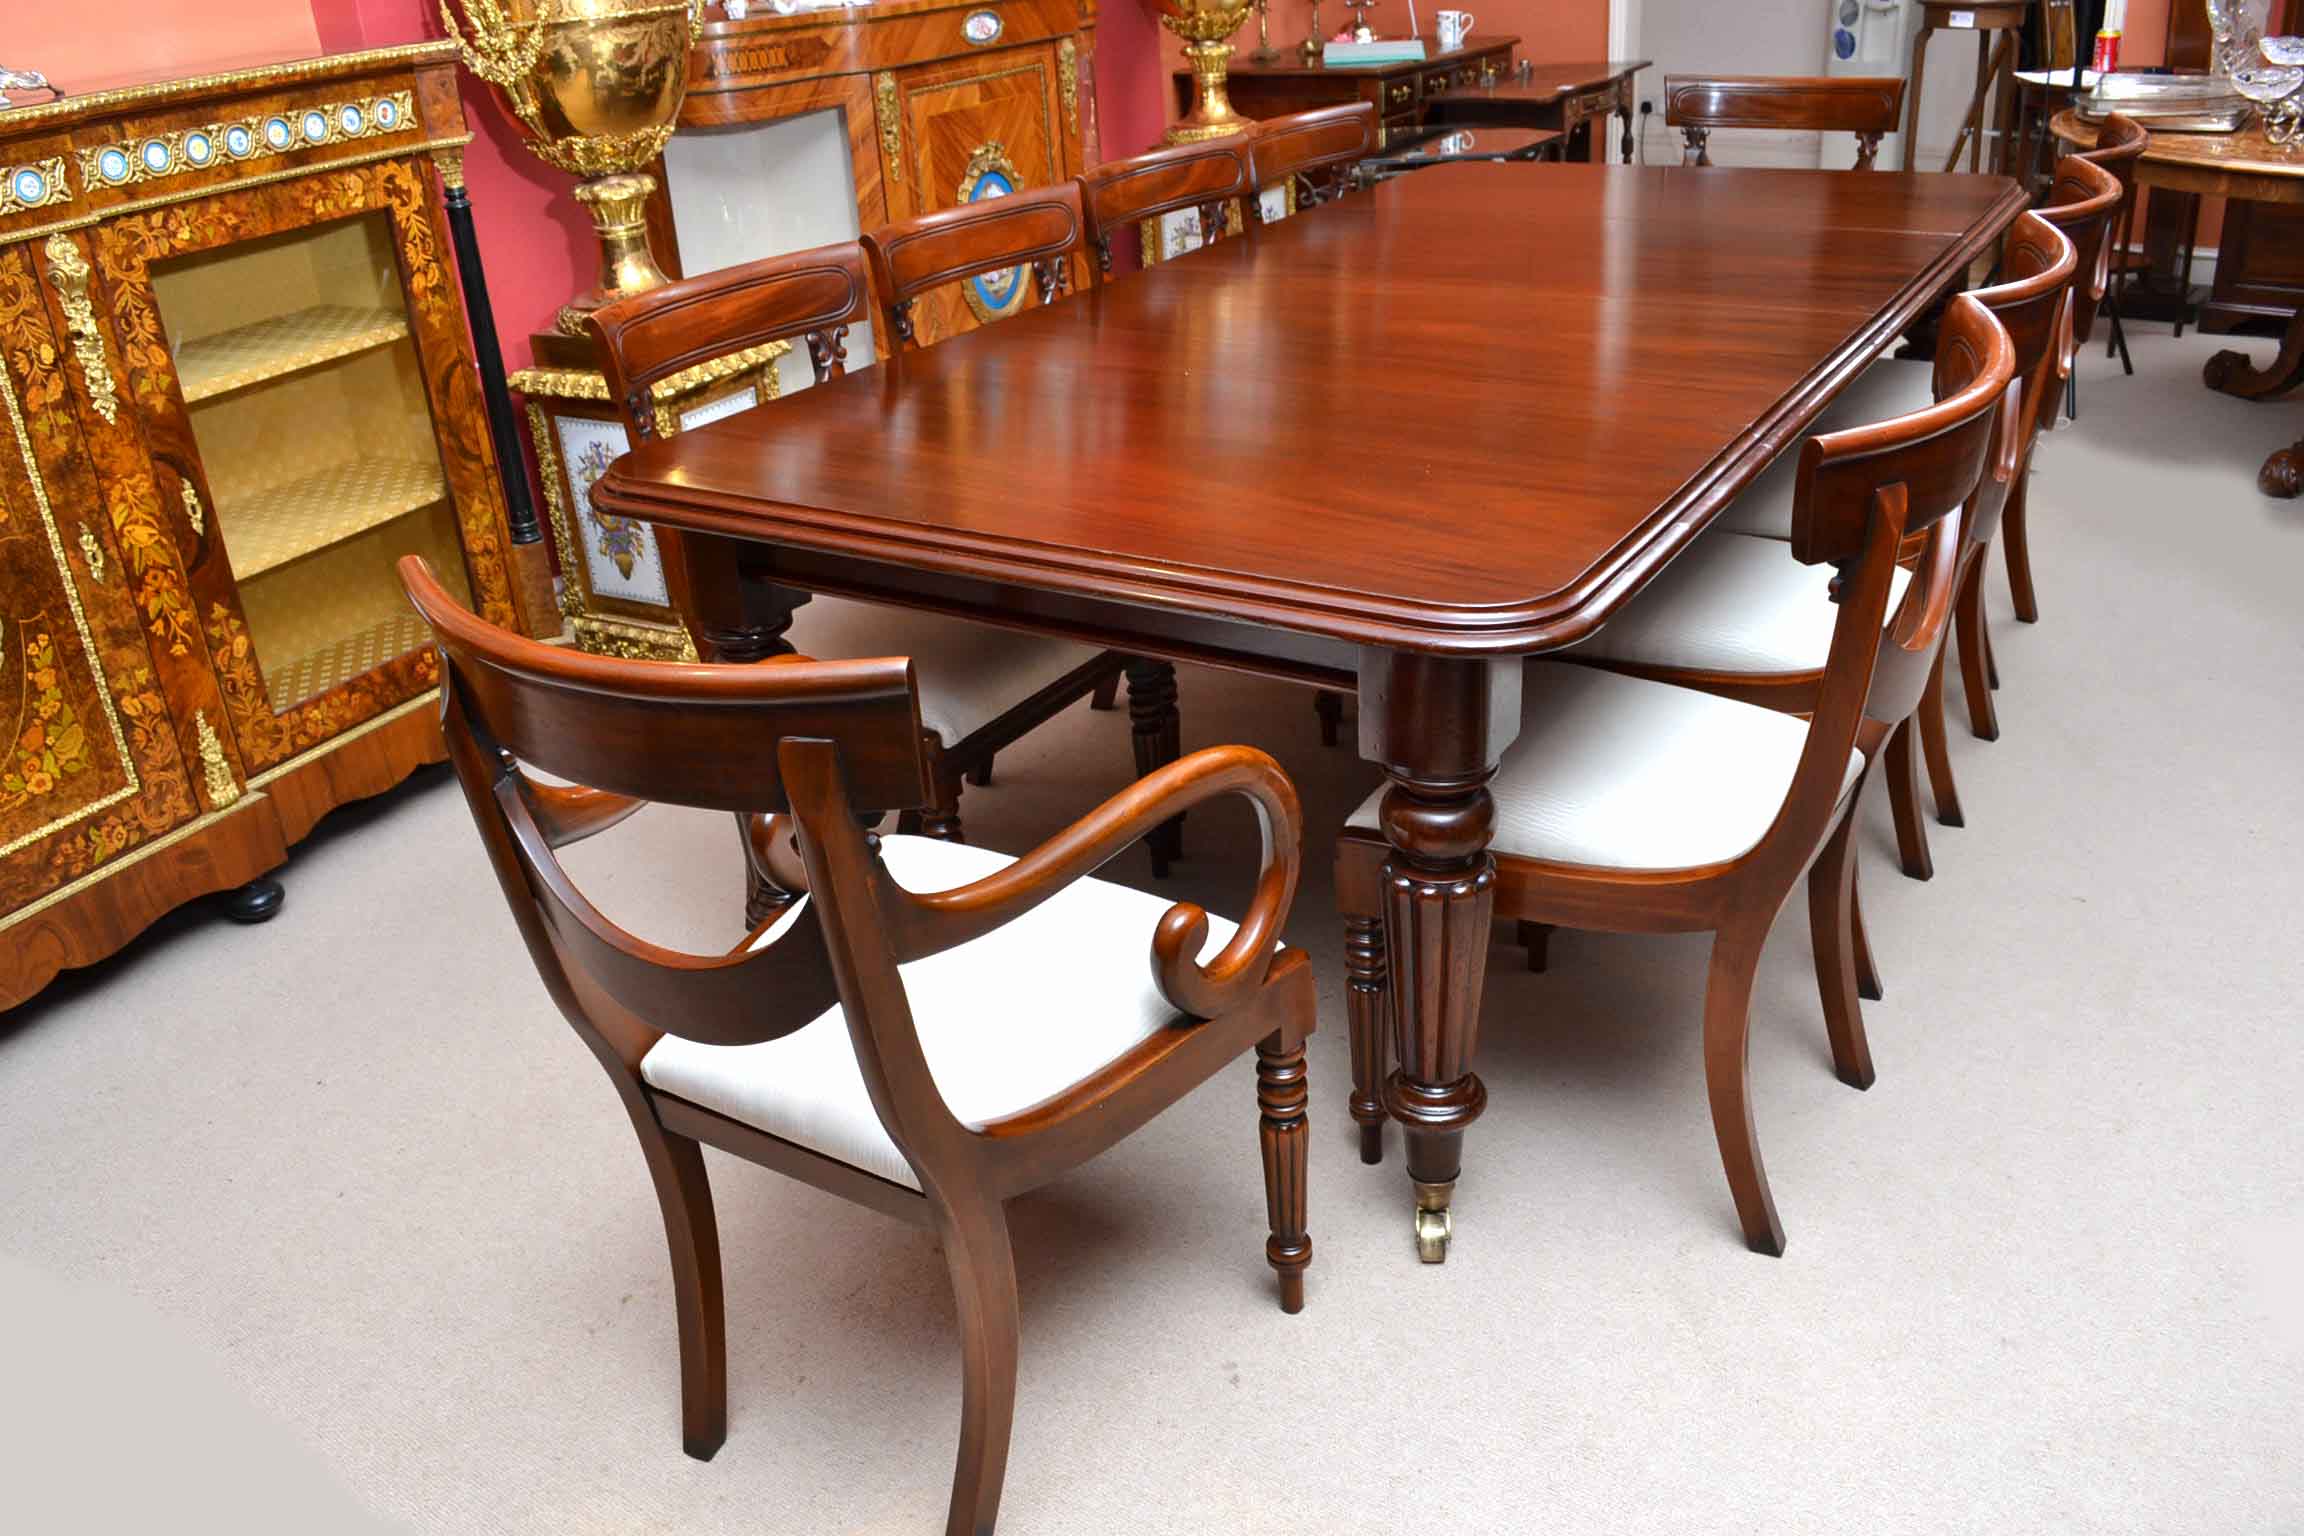 Types Of Antique Dining Room Tables